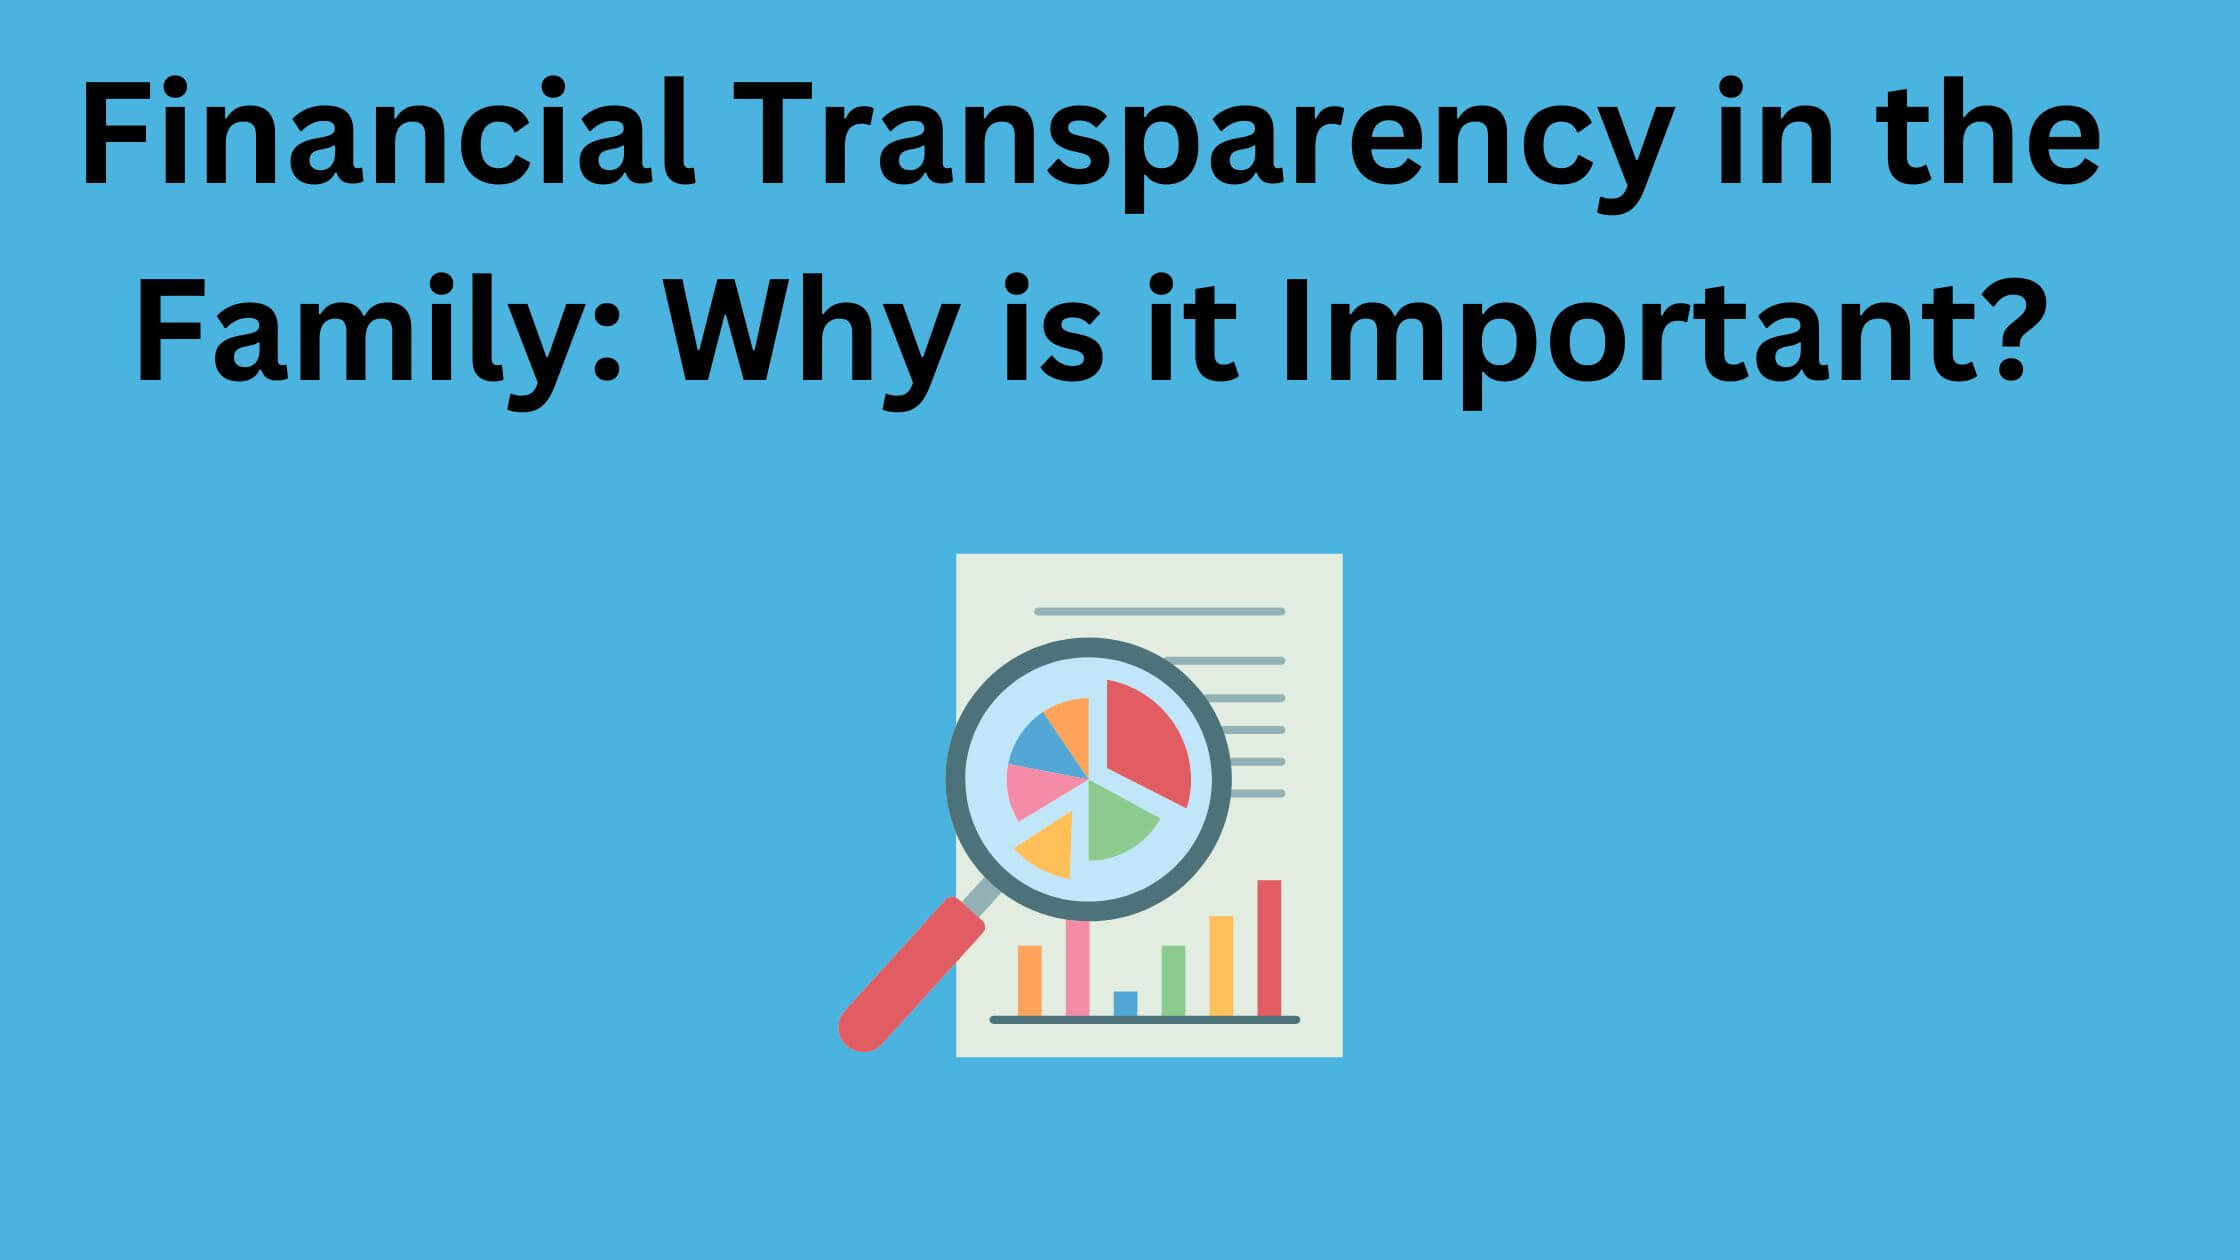 Importance of Financial Transparency in the Family